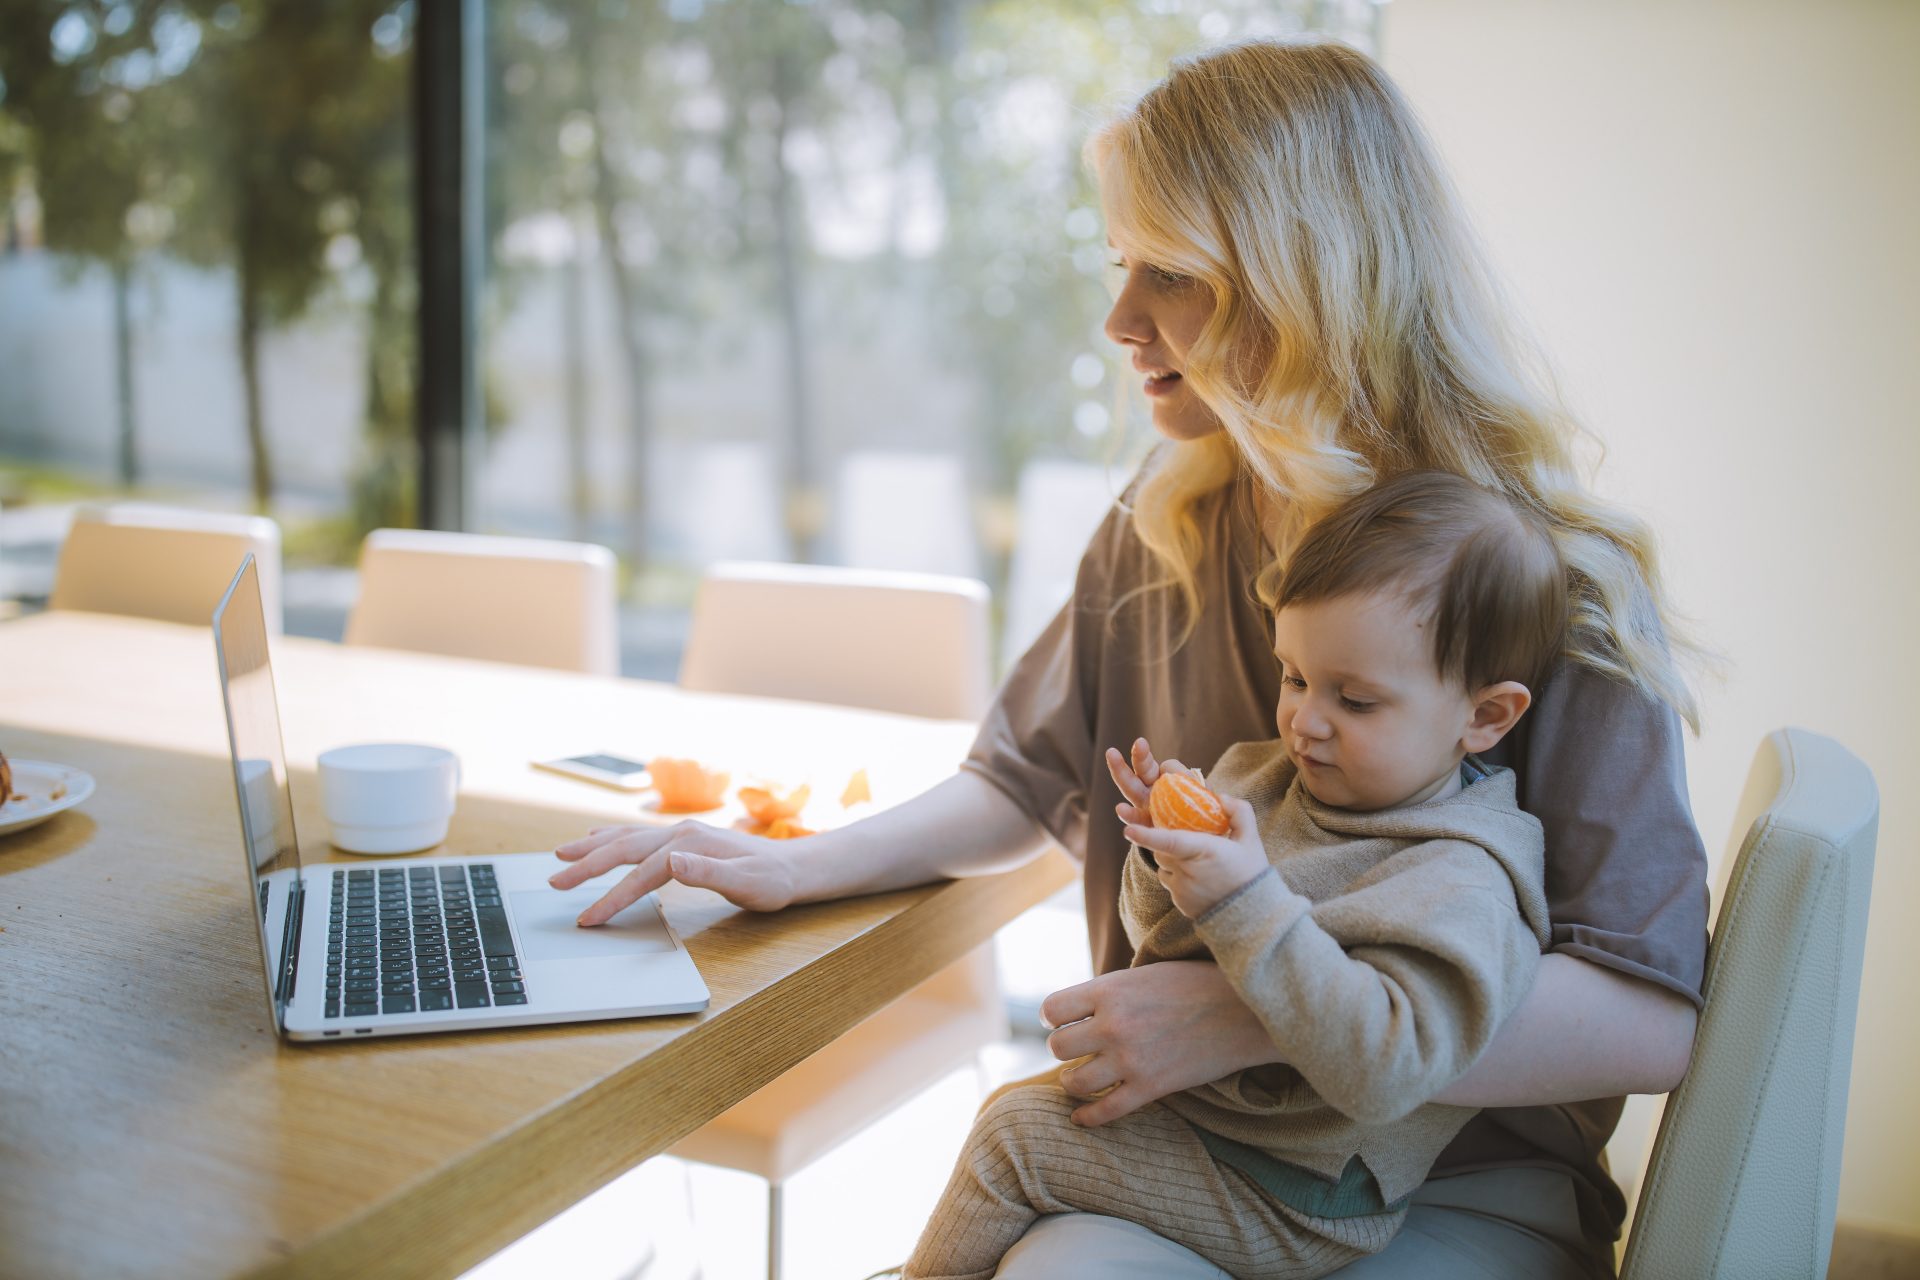 Impact of COVID19 on working mothers